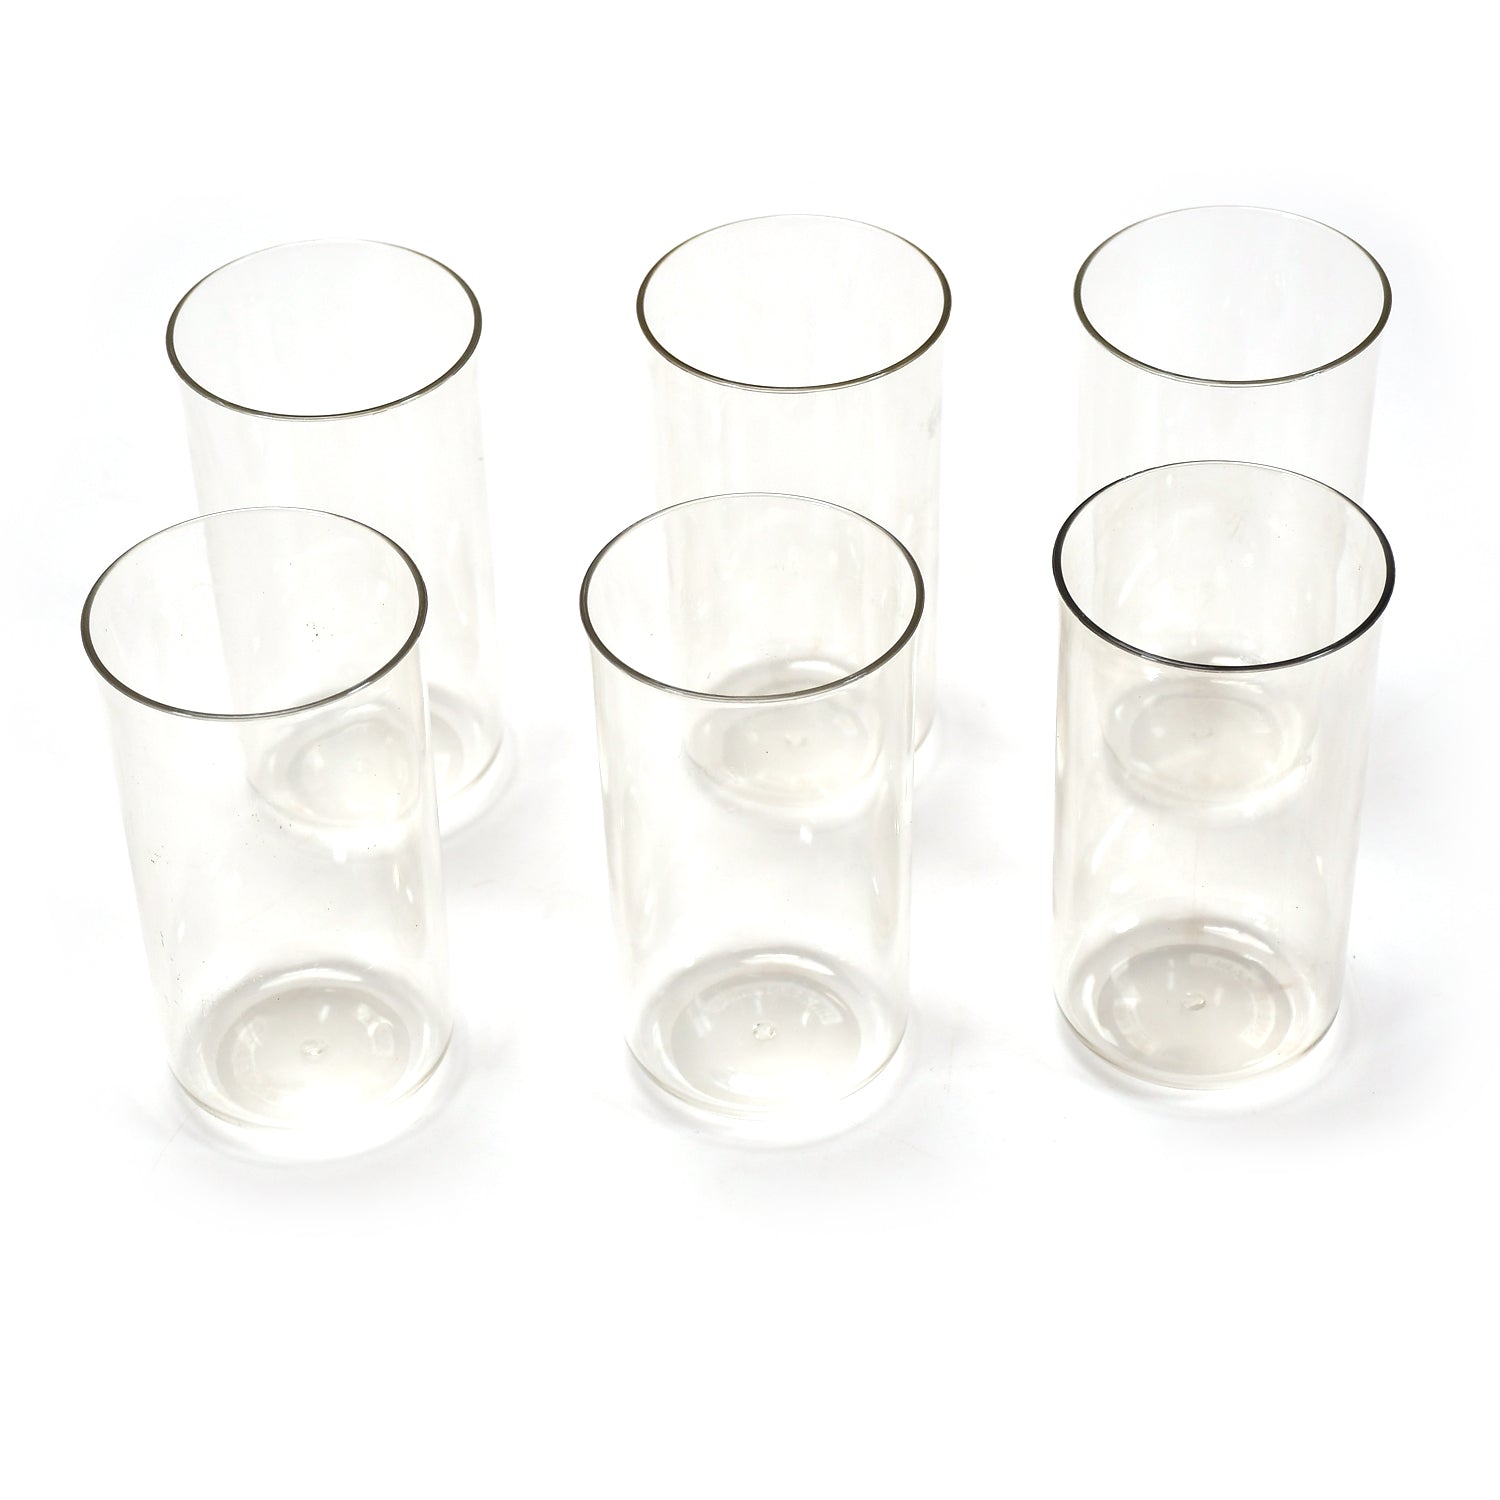 2027A 6 Pcs Large Plastic Glass 300Ml used in all kinds of kitchen and official purposes for drinking water and beverages etc. 